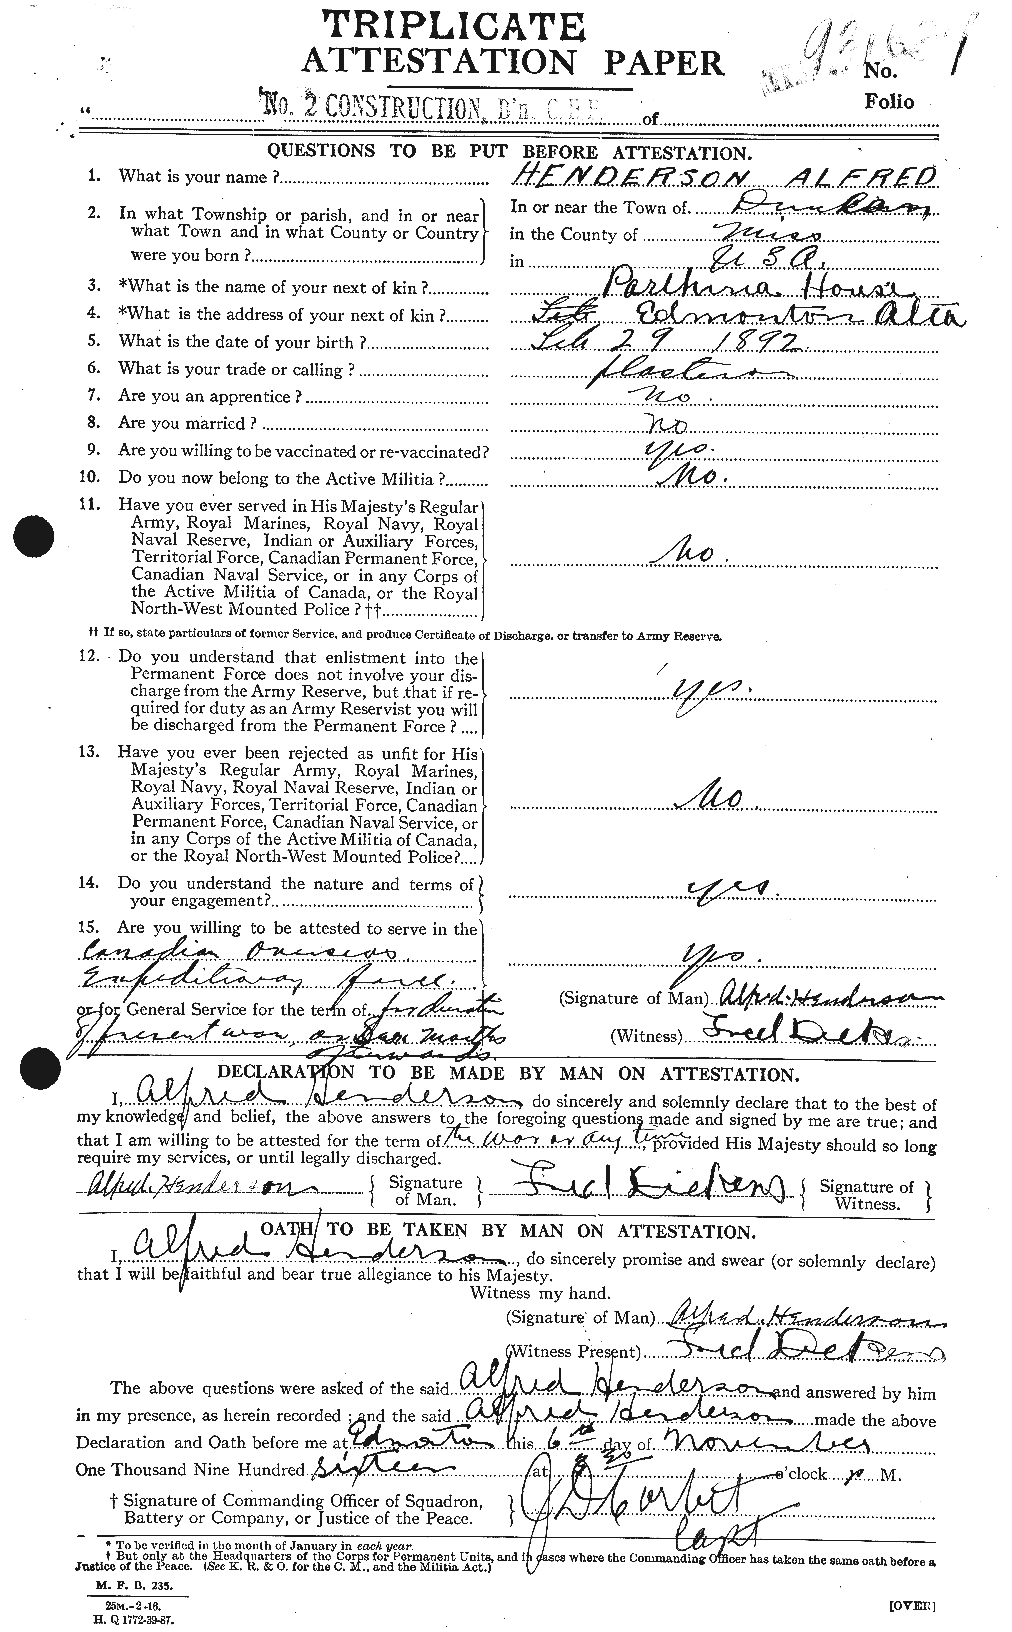 Personnel Records of the First World War - CEF 390024a